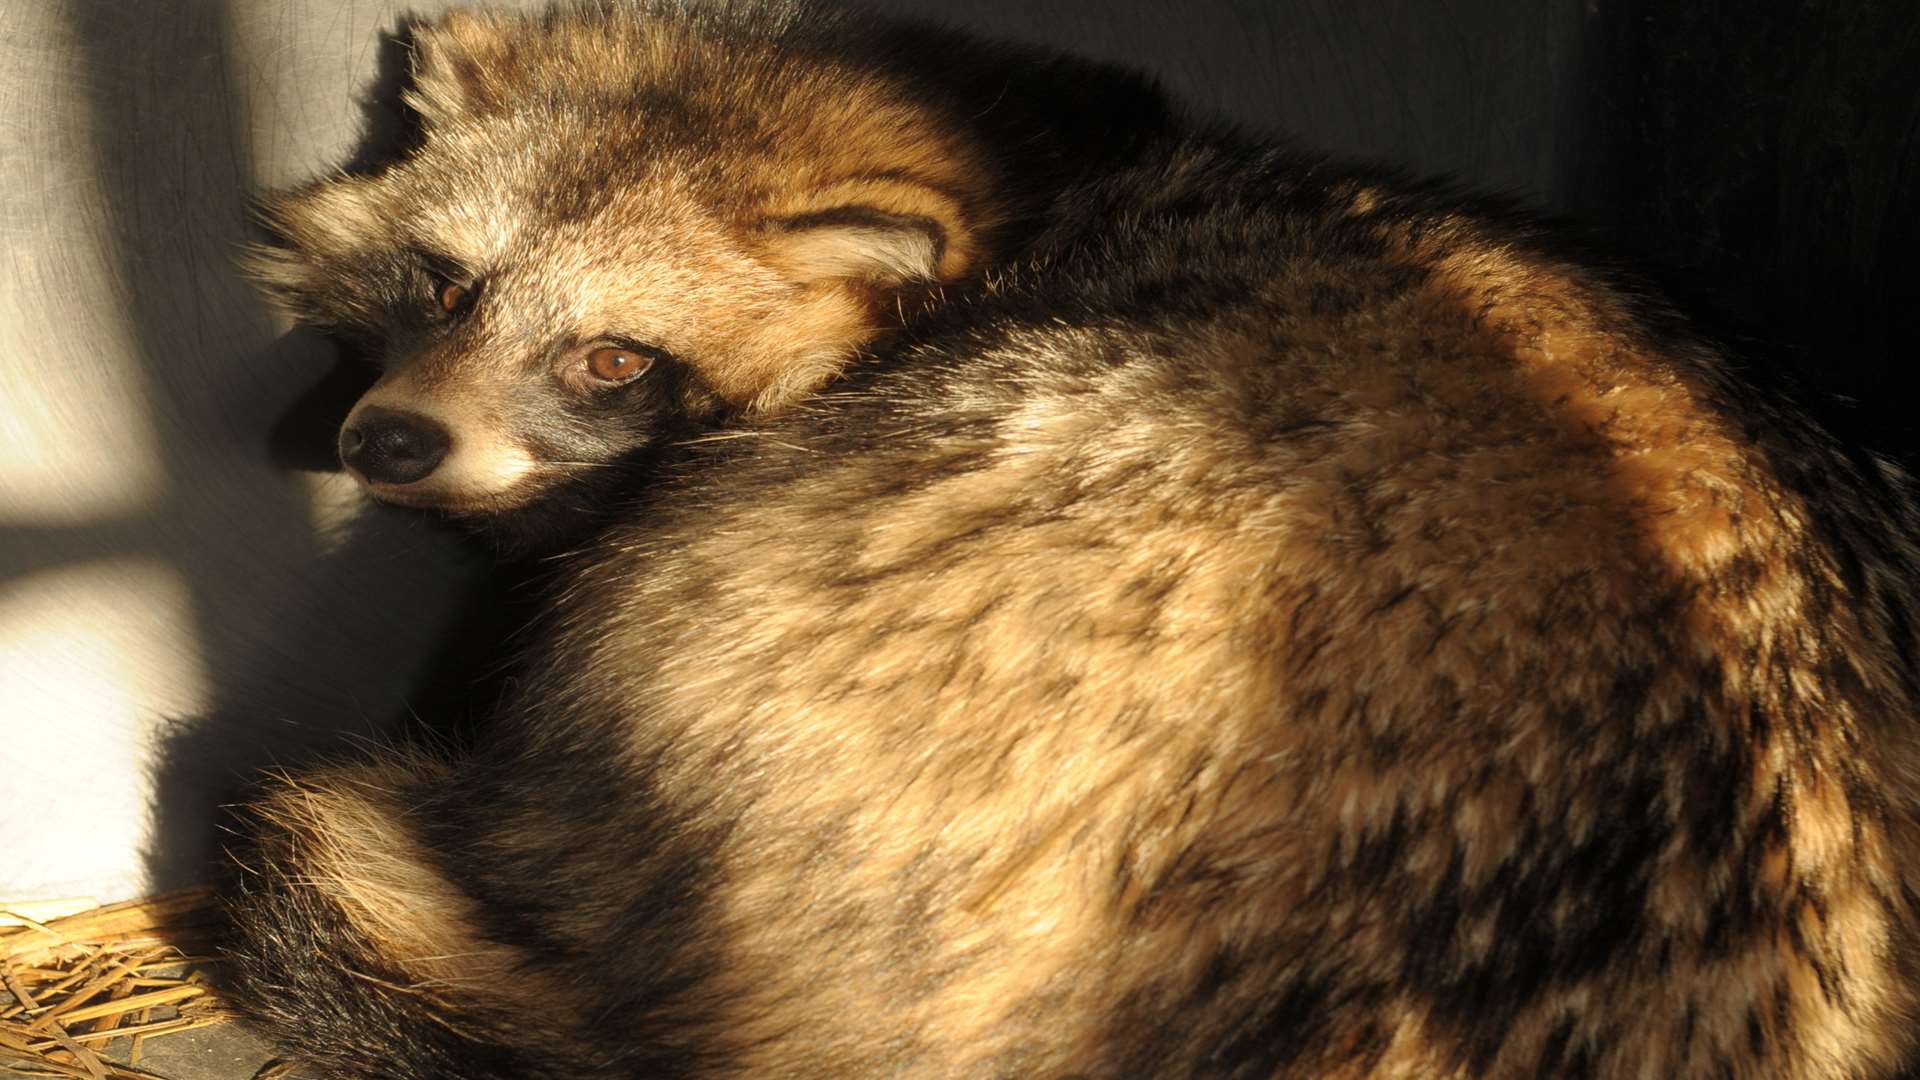 The protesters believe raccoon dog fur is being sold in Maidstone. Stock picture - this animal is not part of the fur trade